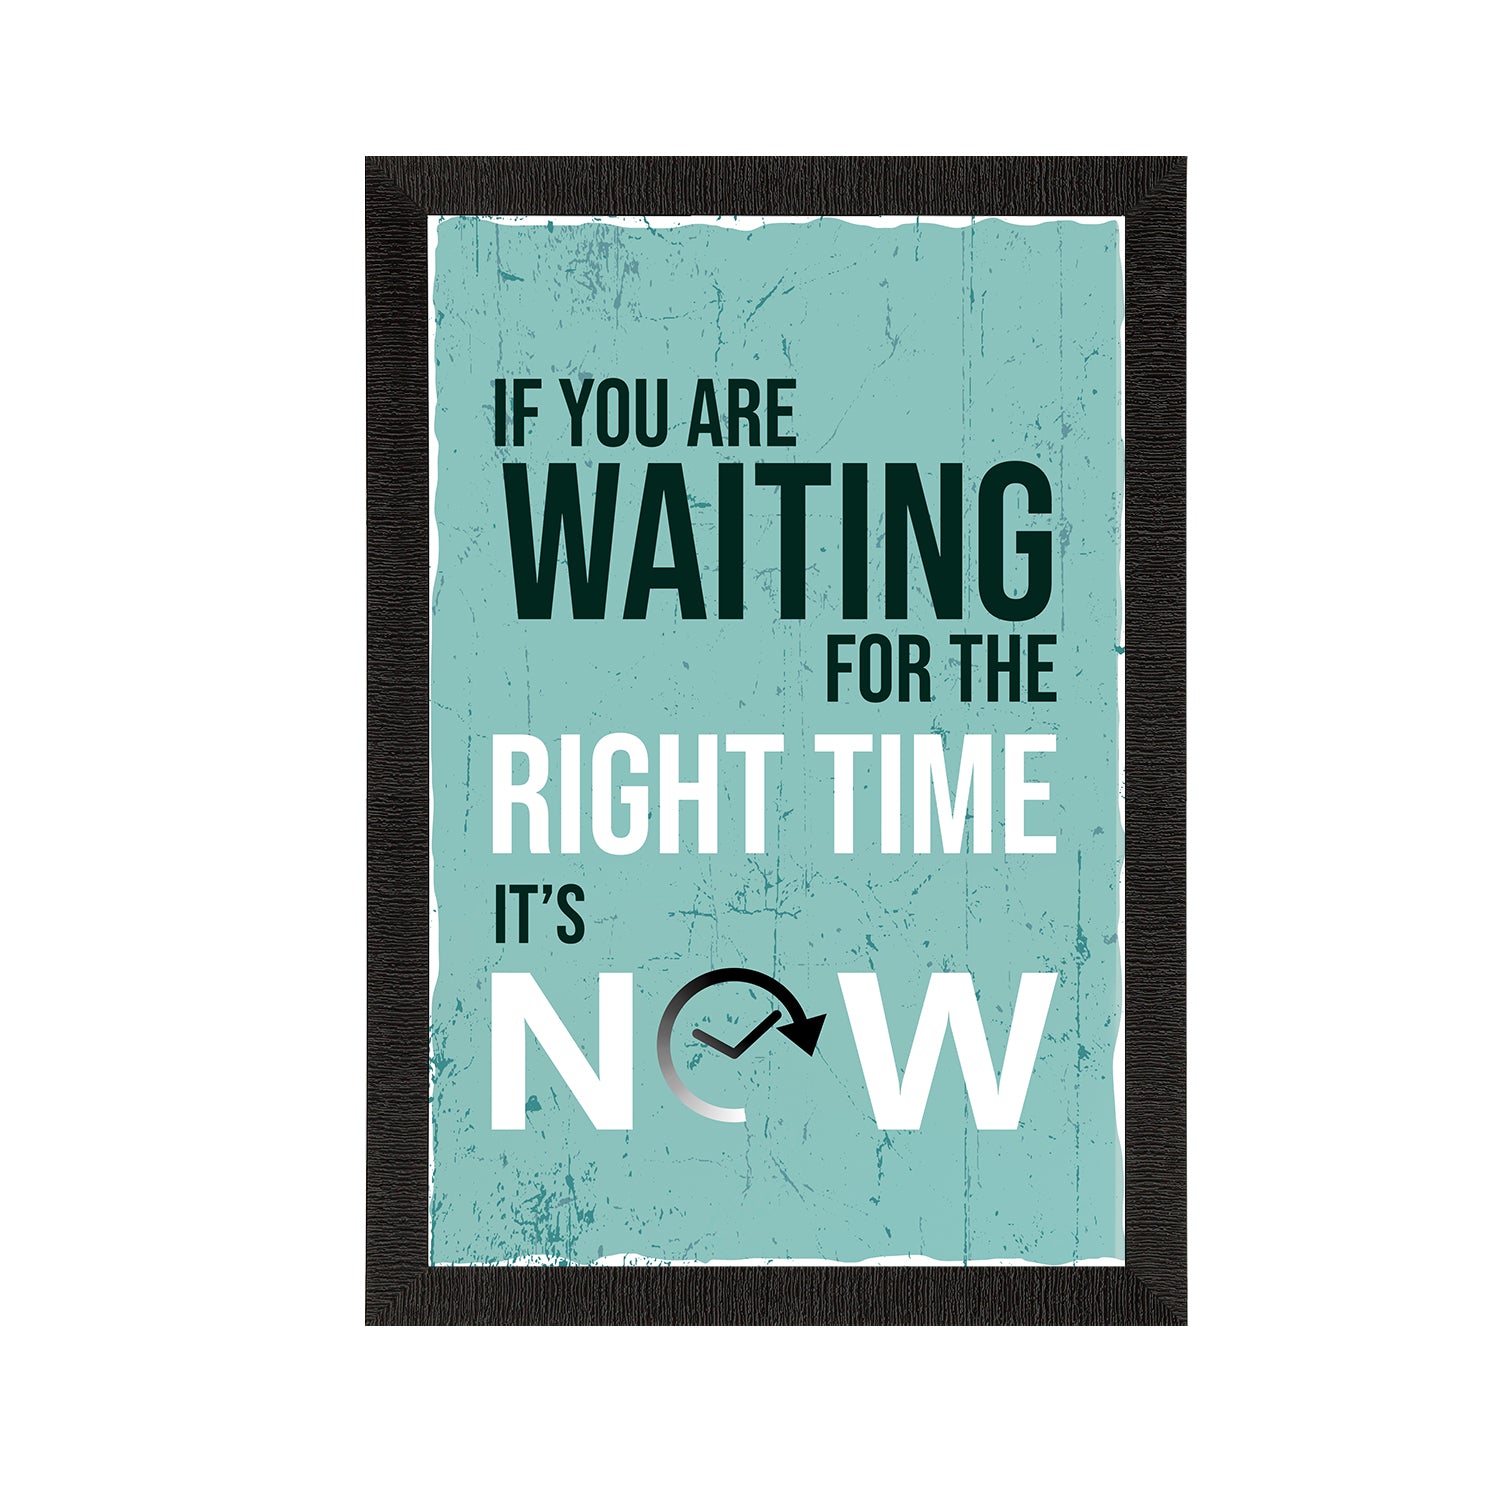 "If You Are Waiting For The RIGHT TIME, Its NOW"  Motivational Quote Satin Matt Texture UV Art Painting